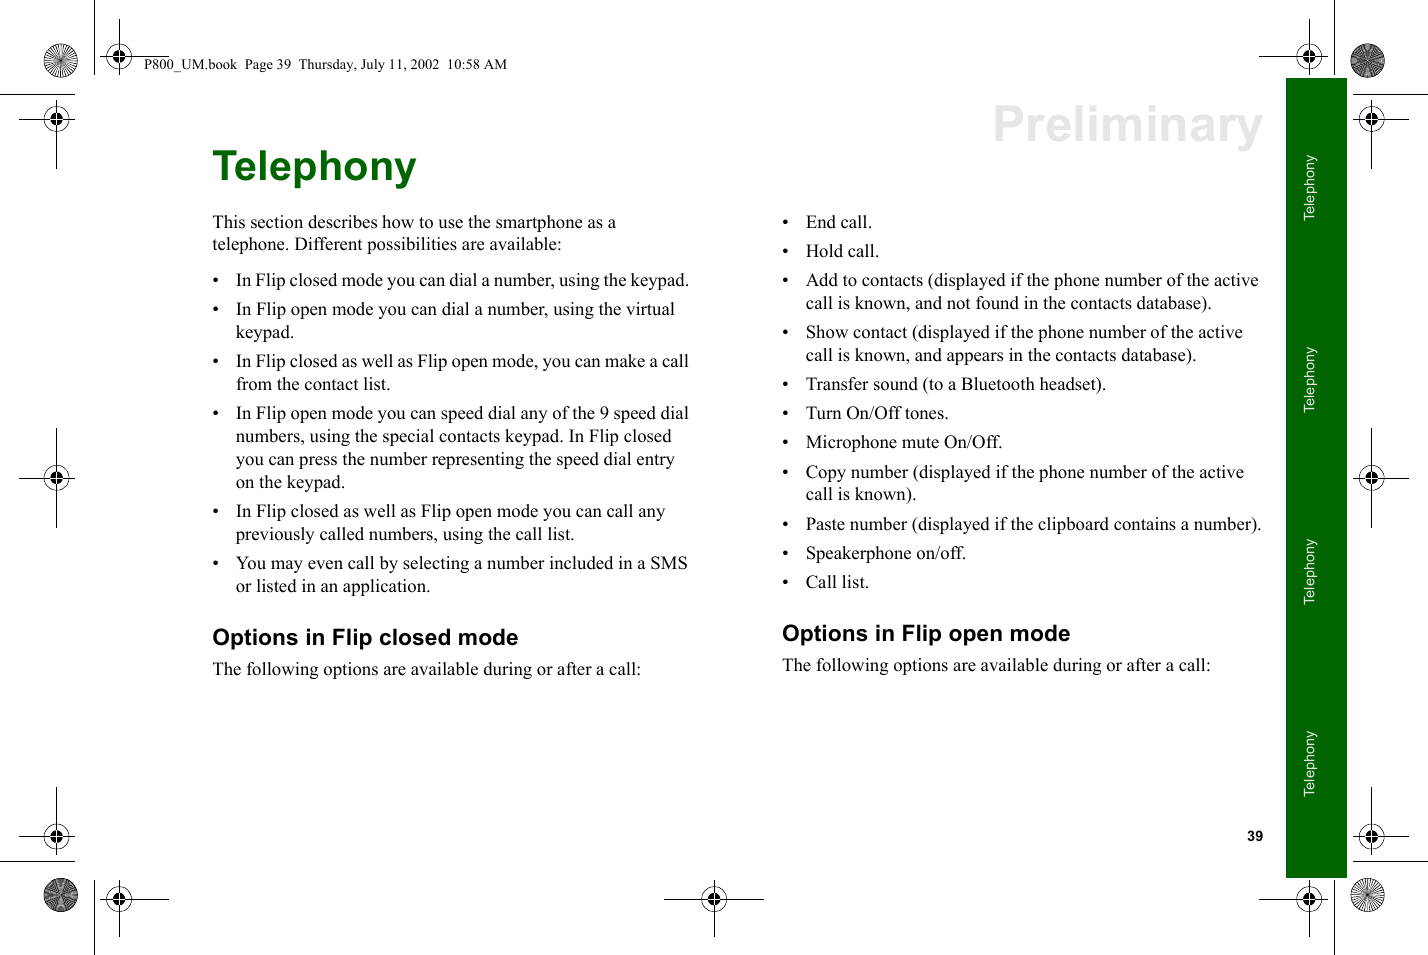 39TelephonyTelephonyTelephonyTelephonyPreliminaryTelephonyThis section describes how to use the smartphone as a telephone. Different possibilities are available:• In Flip closed mode you can dial a number, using the keypad. • In Flip open mode you can dial a number, using the virtual keypad.• In Flip closed as well as Flip open mode, you can make a call from the contact list. • In Flip open mode you can speed dial any of the 9 speed dial numbers, using the special contacts keypad. In Flip closed you can press the number representing the speed dial entry on the keypad.• In Flip closed as well as Flip open mode you can call any previously called numbers, using the call list. • You may even call by selecting a number included in a SMS or listed in an application.Options in Flip closed modeThe following options are available during or after a call:• End call.• Hold call.• Add to contacts (displayed if the phone number of the active call is known, and not found in the contacts database). • Show contact (displayed if the phone number of the active call is known, and appears in the contacts database). • Transfer sound (to a Bluetooth headset).• Turn On/Off tones.• Microphone mute On/Off.• Copy number (displayed if the phone number of the active call is known).• Paste number (displayed if the clipboard contains a number).• Speakerphone on/off.• Call list.Options in Flip open modeThe following options are available during or after a call:P800_UM.book  Page 39  Thursday, July 11, 2002  10:58 AM